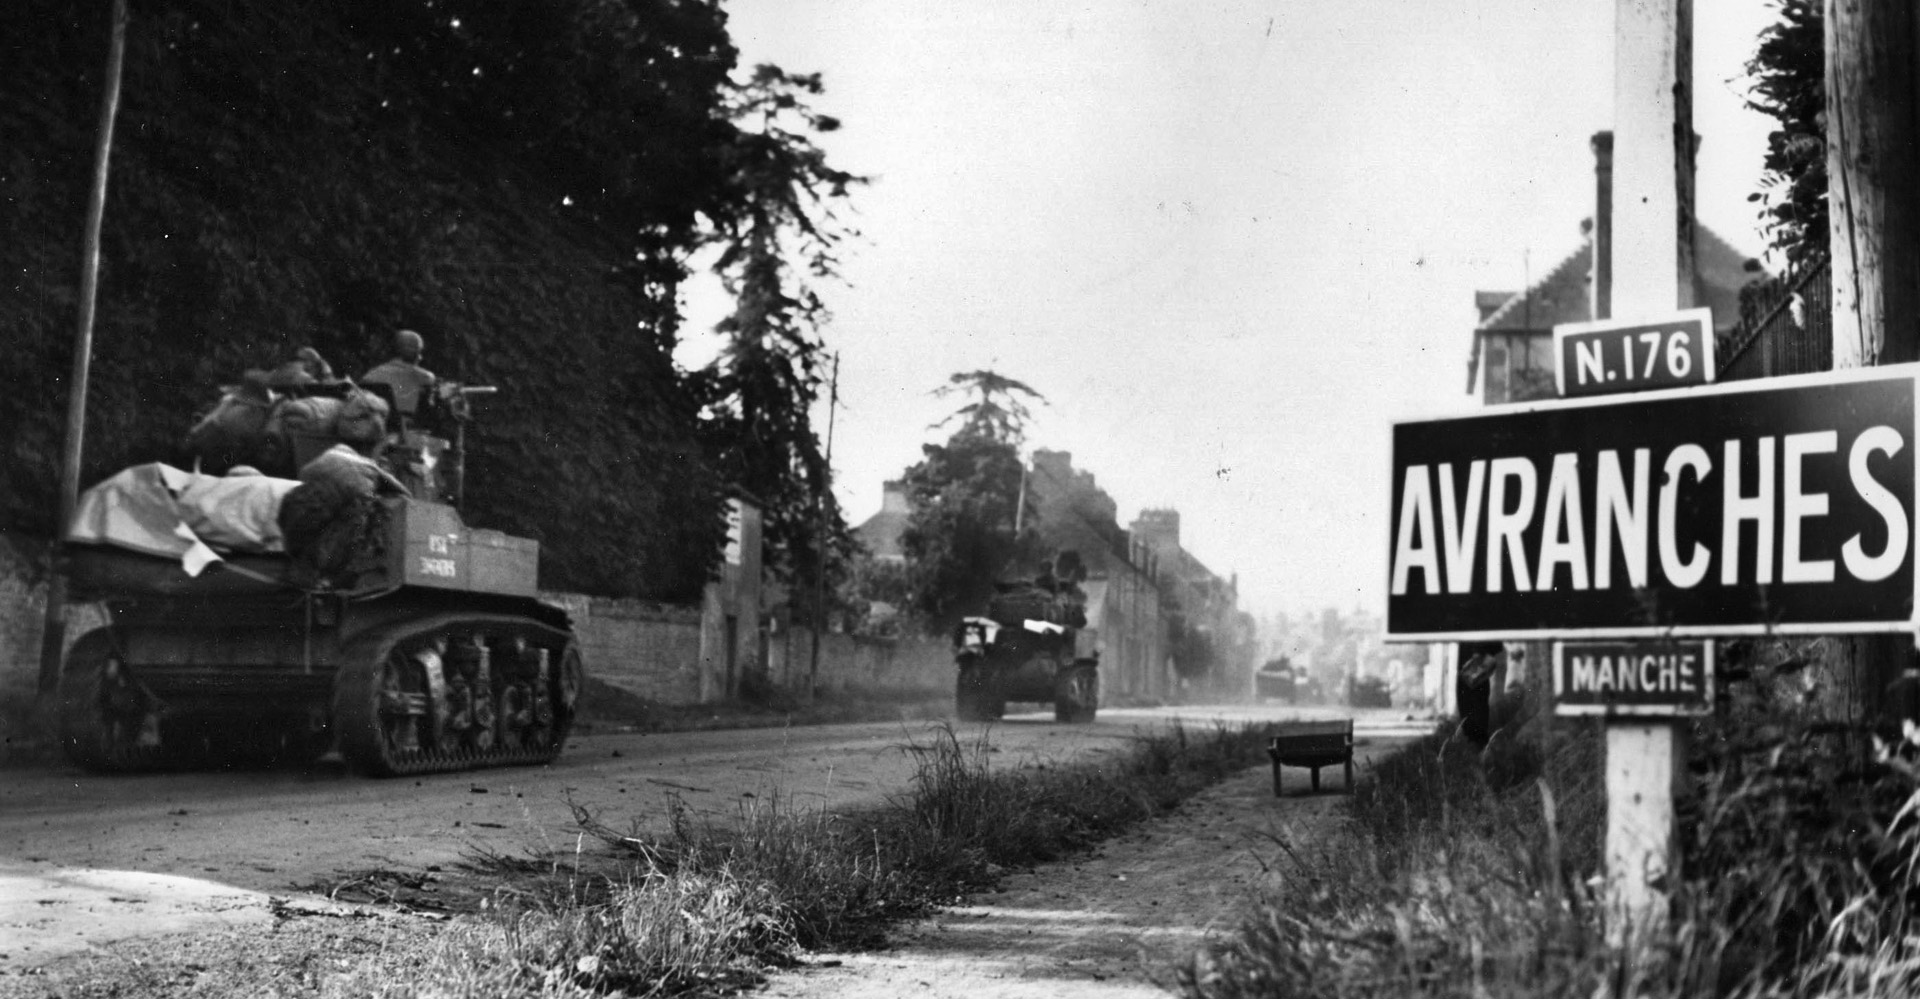 A column of American tanks rushes into the city of Avranches to knock out pockets of resistance, August 1, 1944.